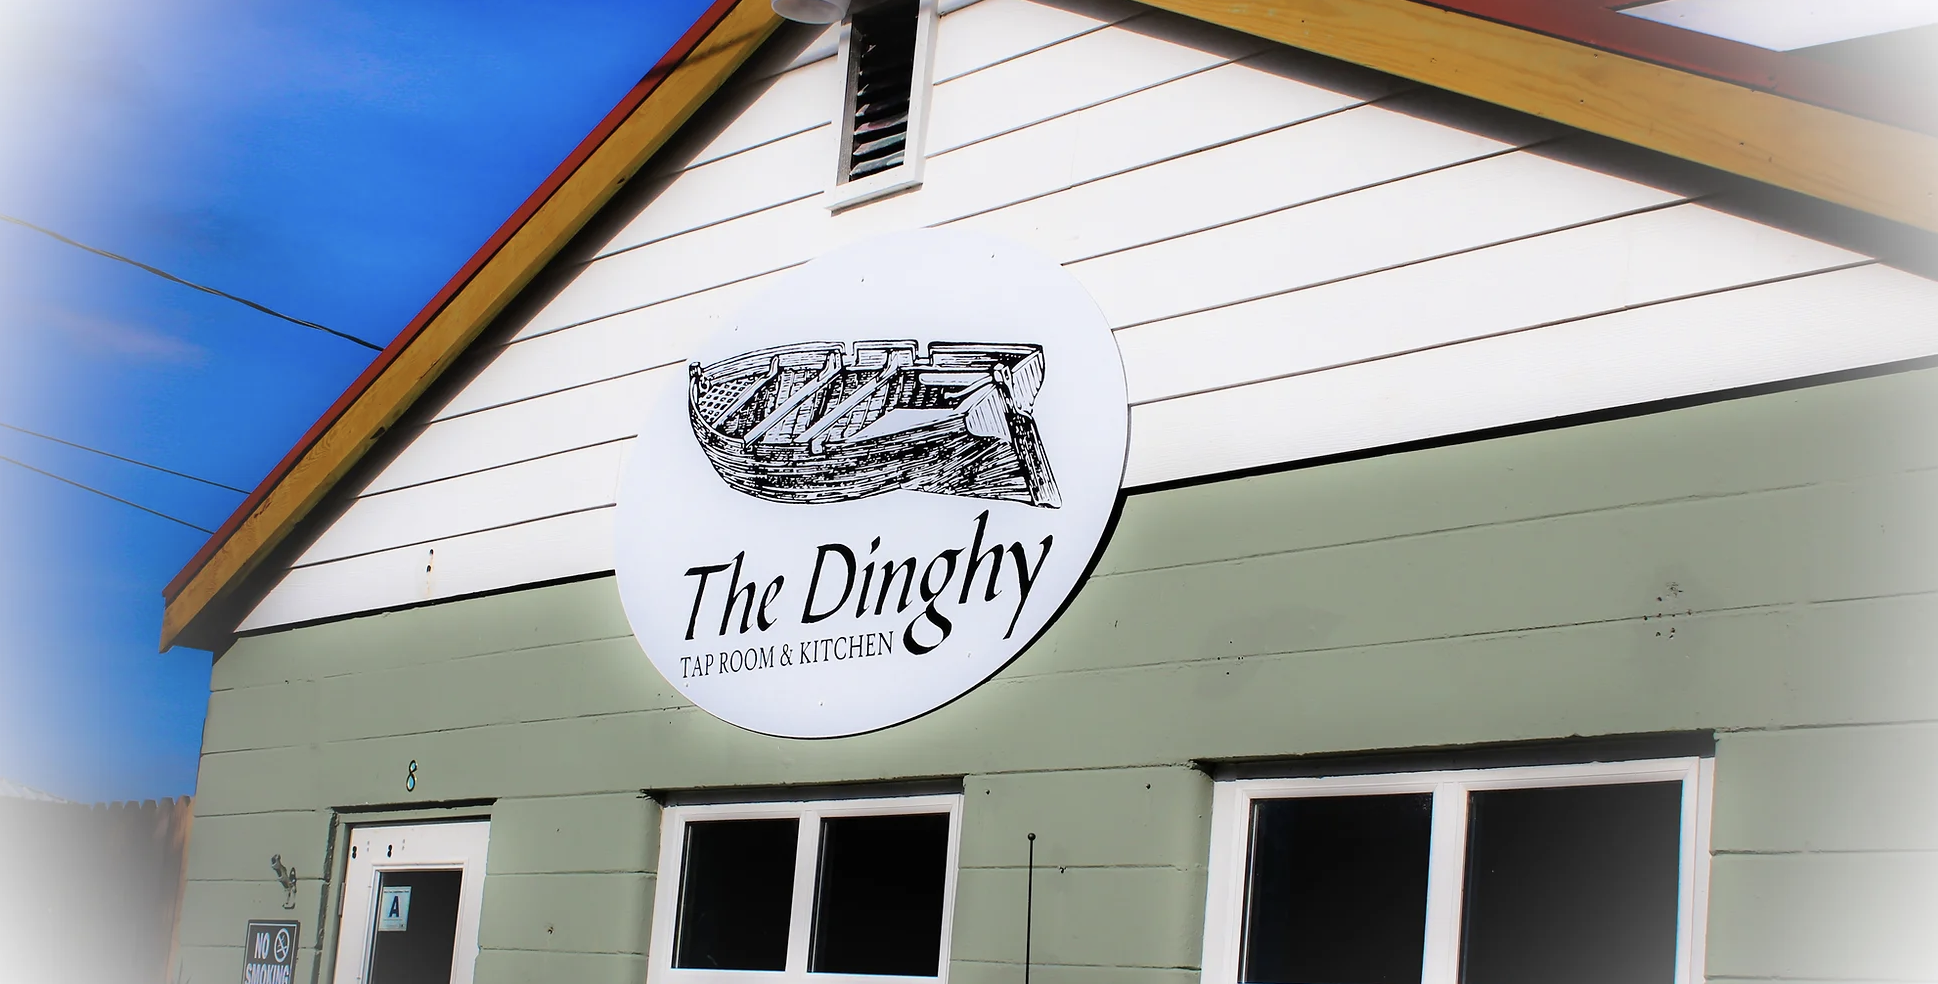 The Dinghy Tap Room & Kitchen on IOP